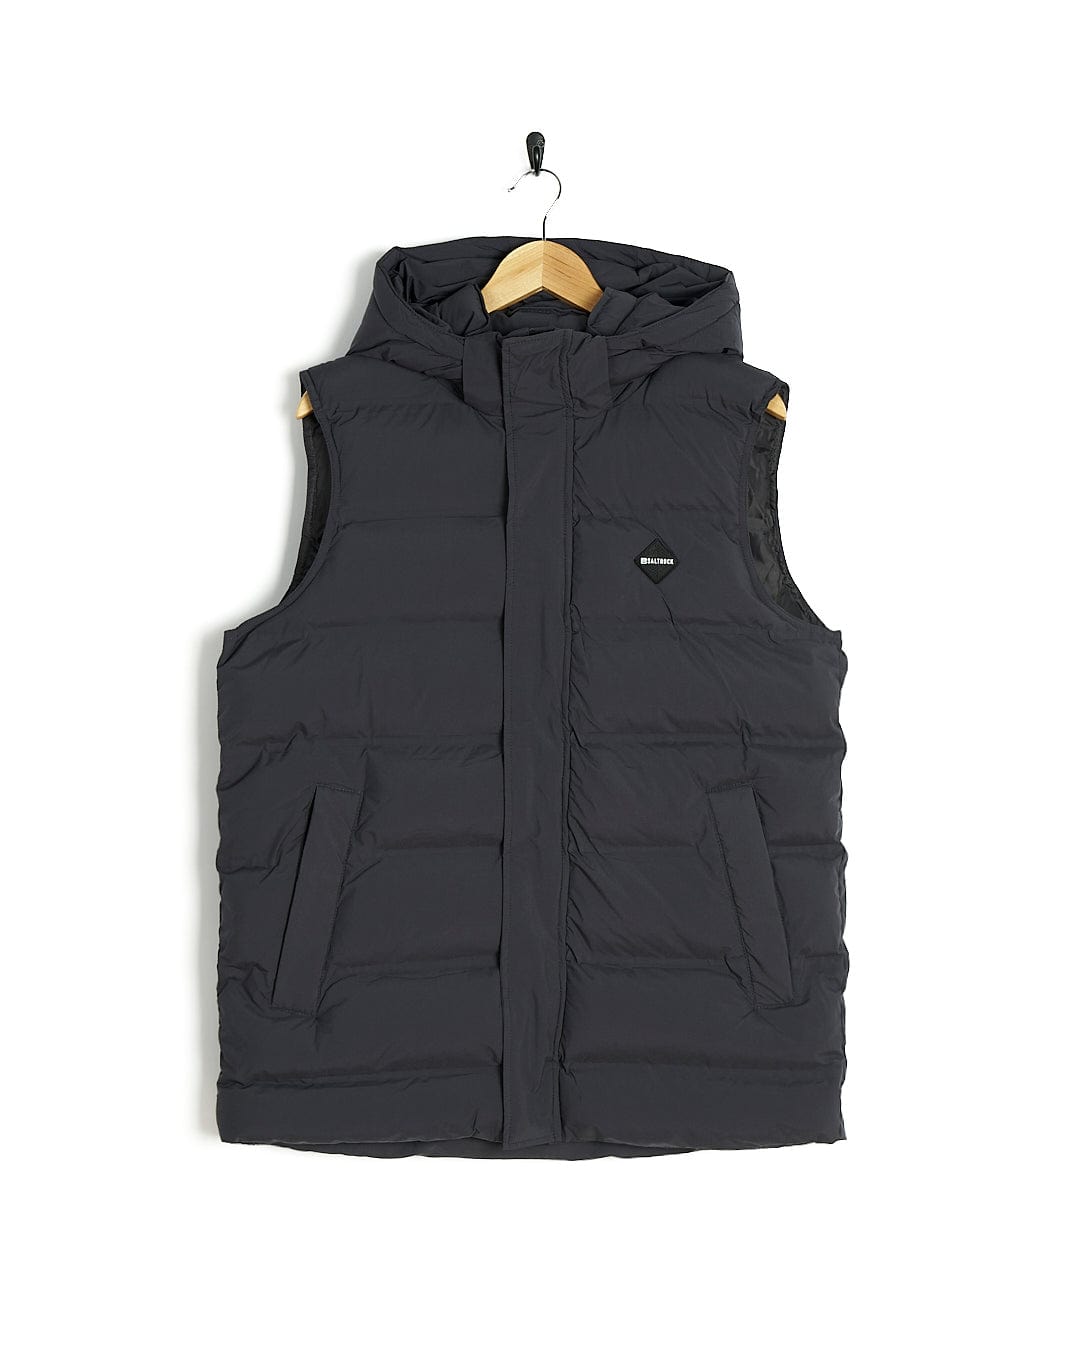 A machine washable Xavier - Mens Padded Gilet - Dark Grey with a hood by Saltrock.